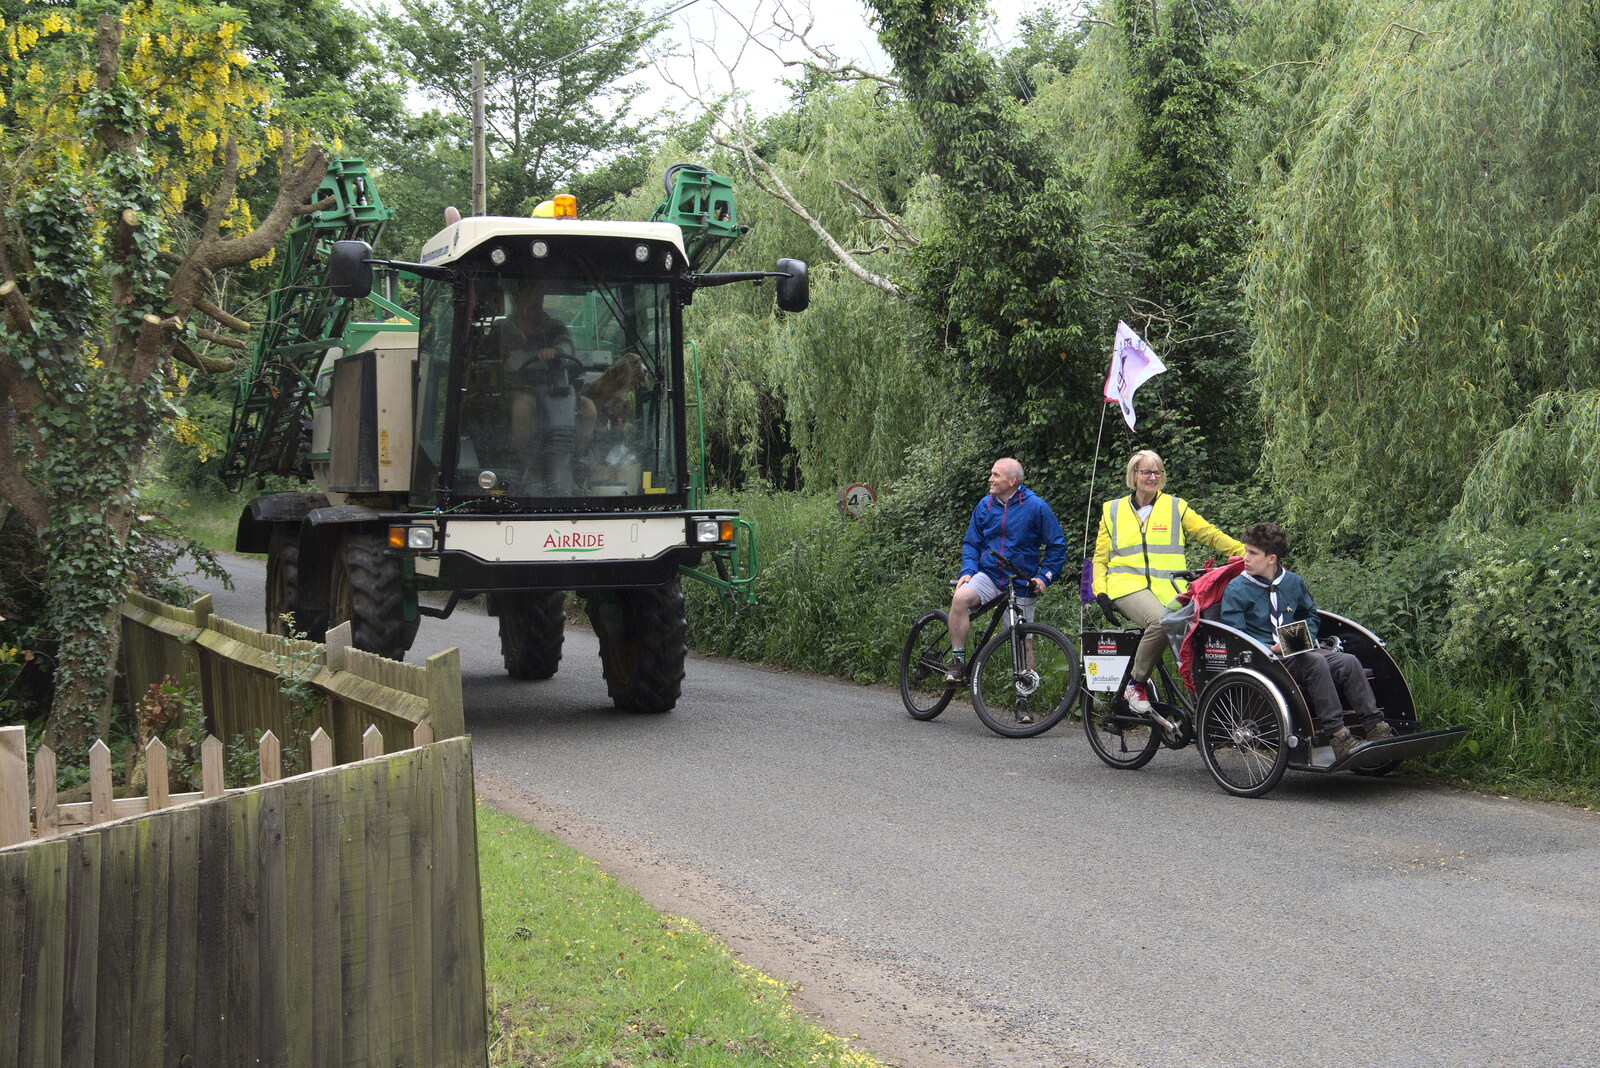 There's a pause to let a sprayer past from The Jubilee Torch Run, Brome and Oakley, Suffolk - 25th May 2022